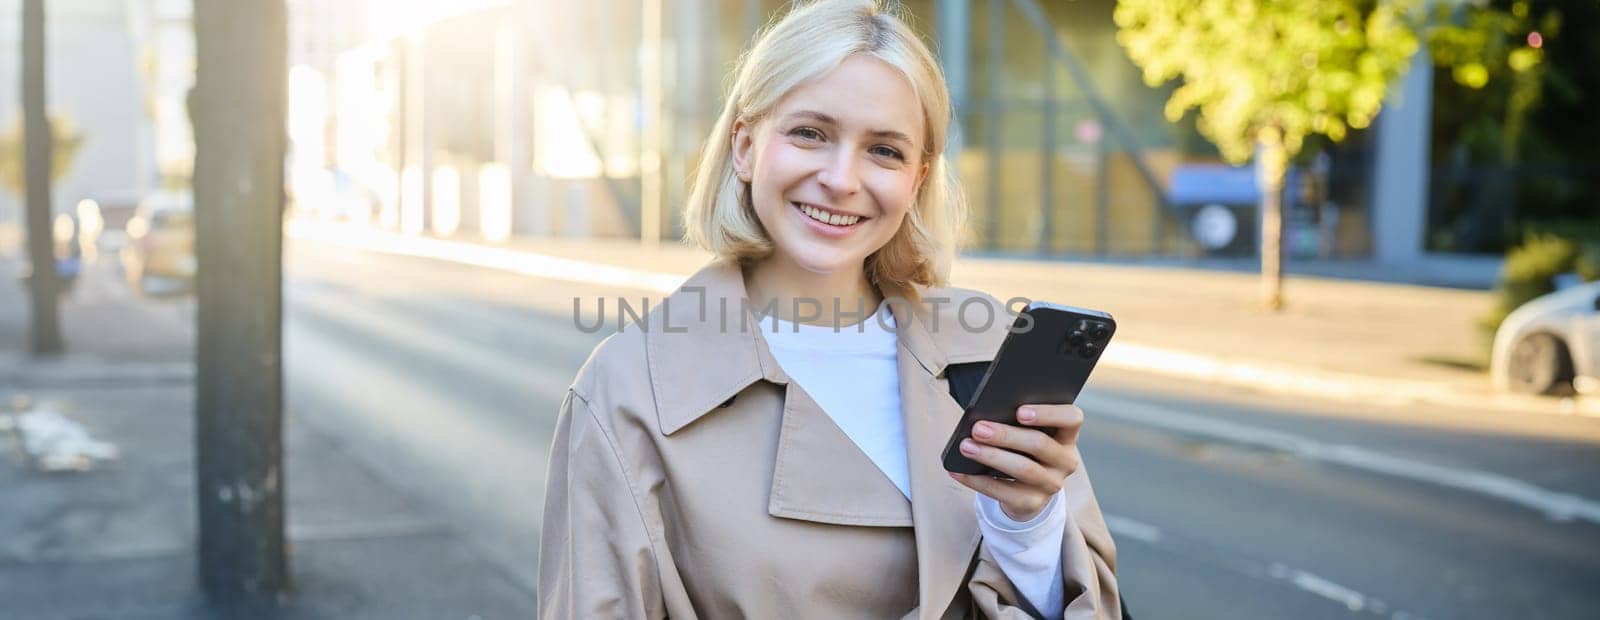 Portrait of smiling blonde woman, wearing trench coat on street, looking happy, using mobile phone, holding smartphone, has pleased and satisfied face expression.